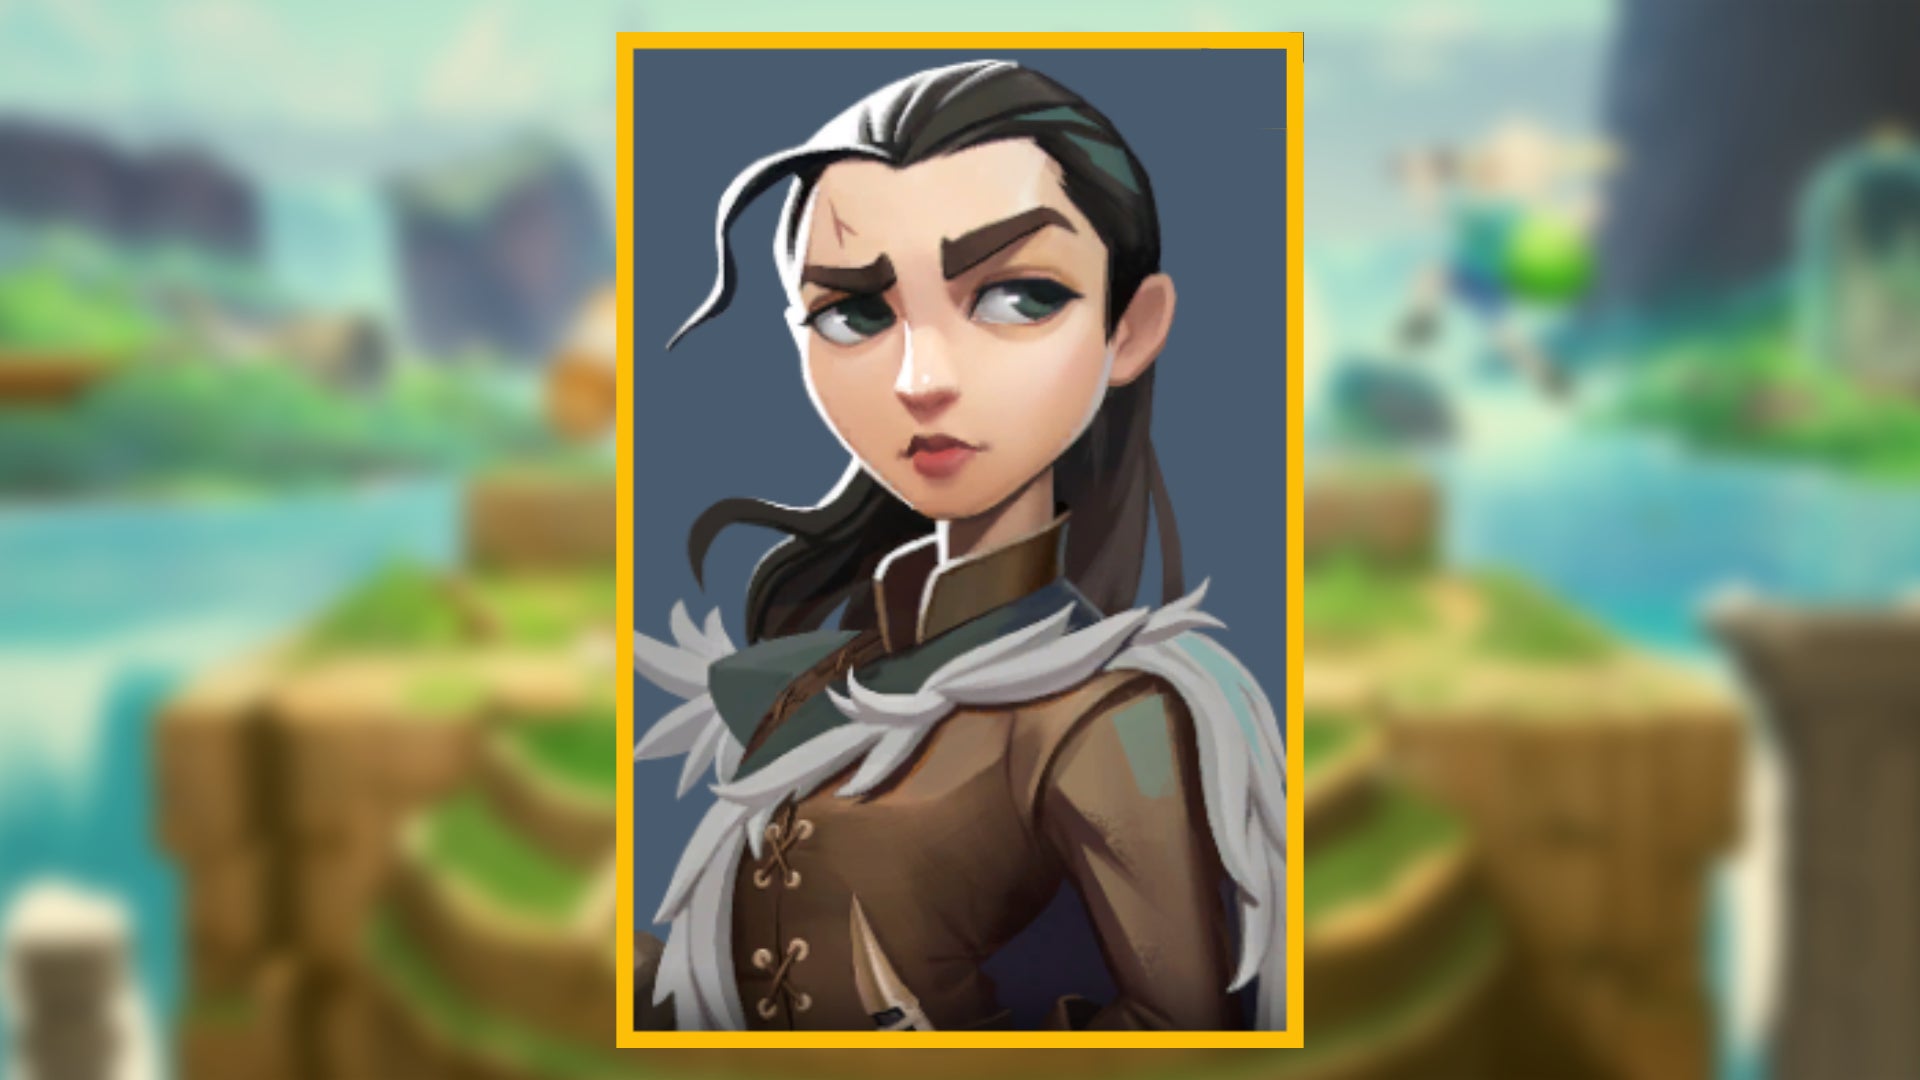 The character portrait of Arya, a playable character in MultiVersus, against a blurred background.